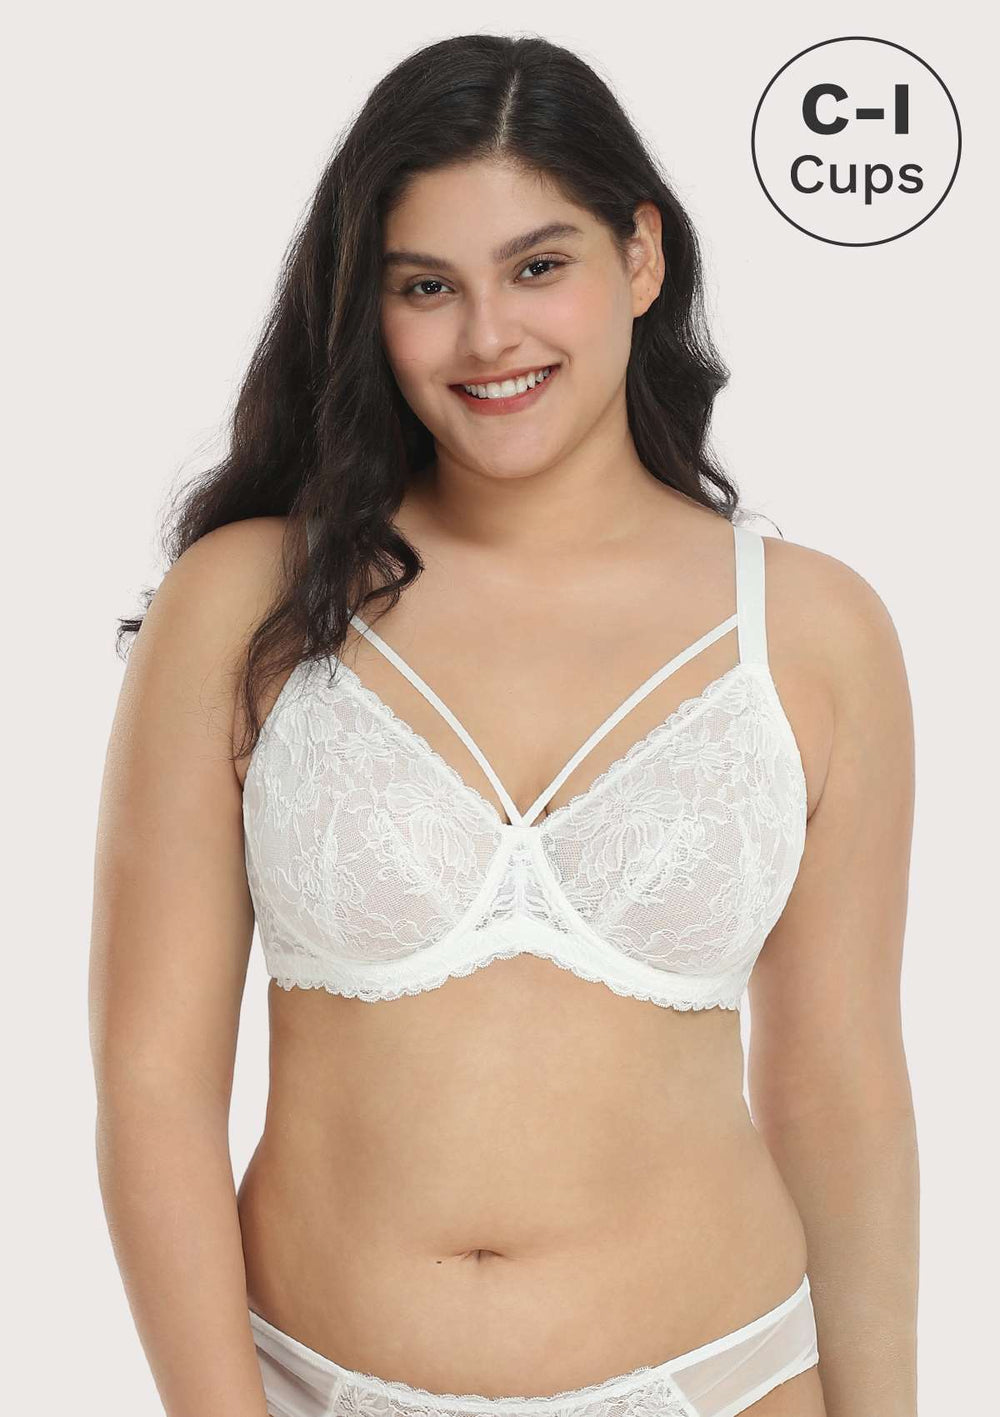 Lace Unlined Full Coverage Bra1130026:Cafe Mocha LBS 2365:46H